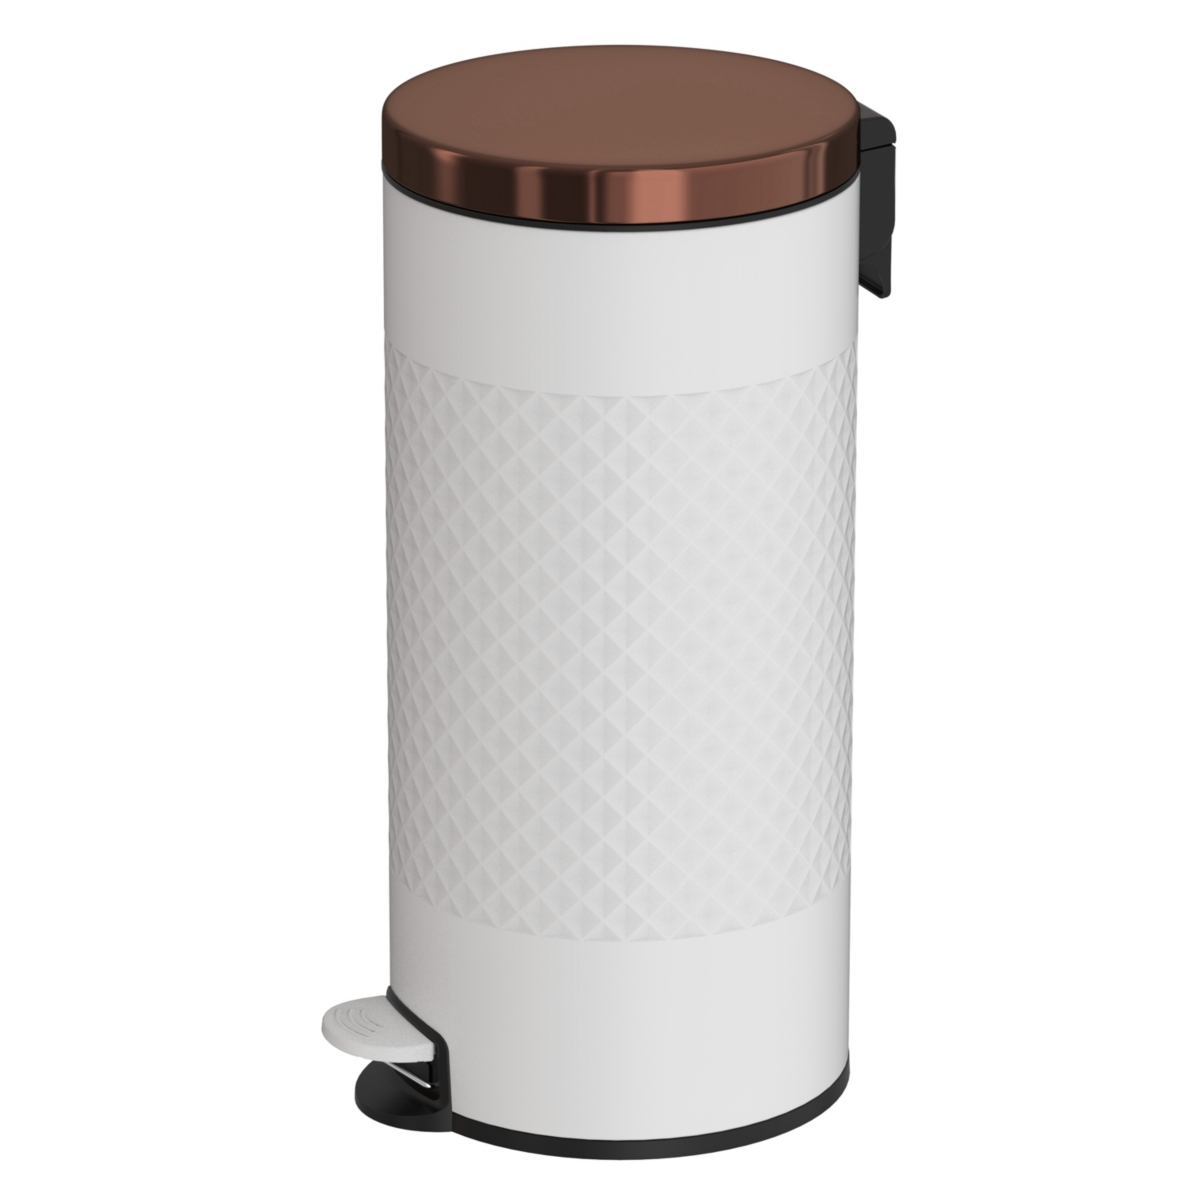 8 Gal./30 Liter White Metal Round Shape Step-on Trash Can with Diamond body design for Kitchen - White